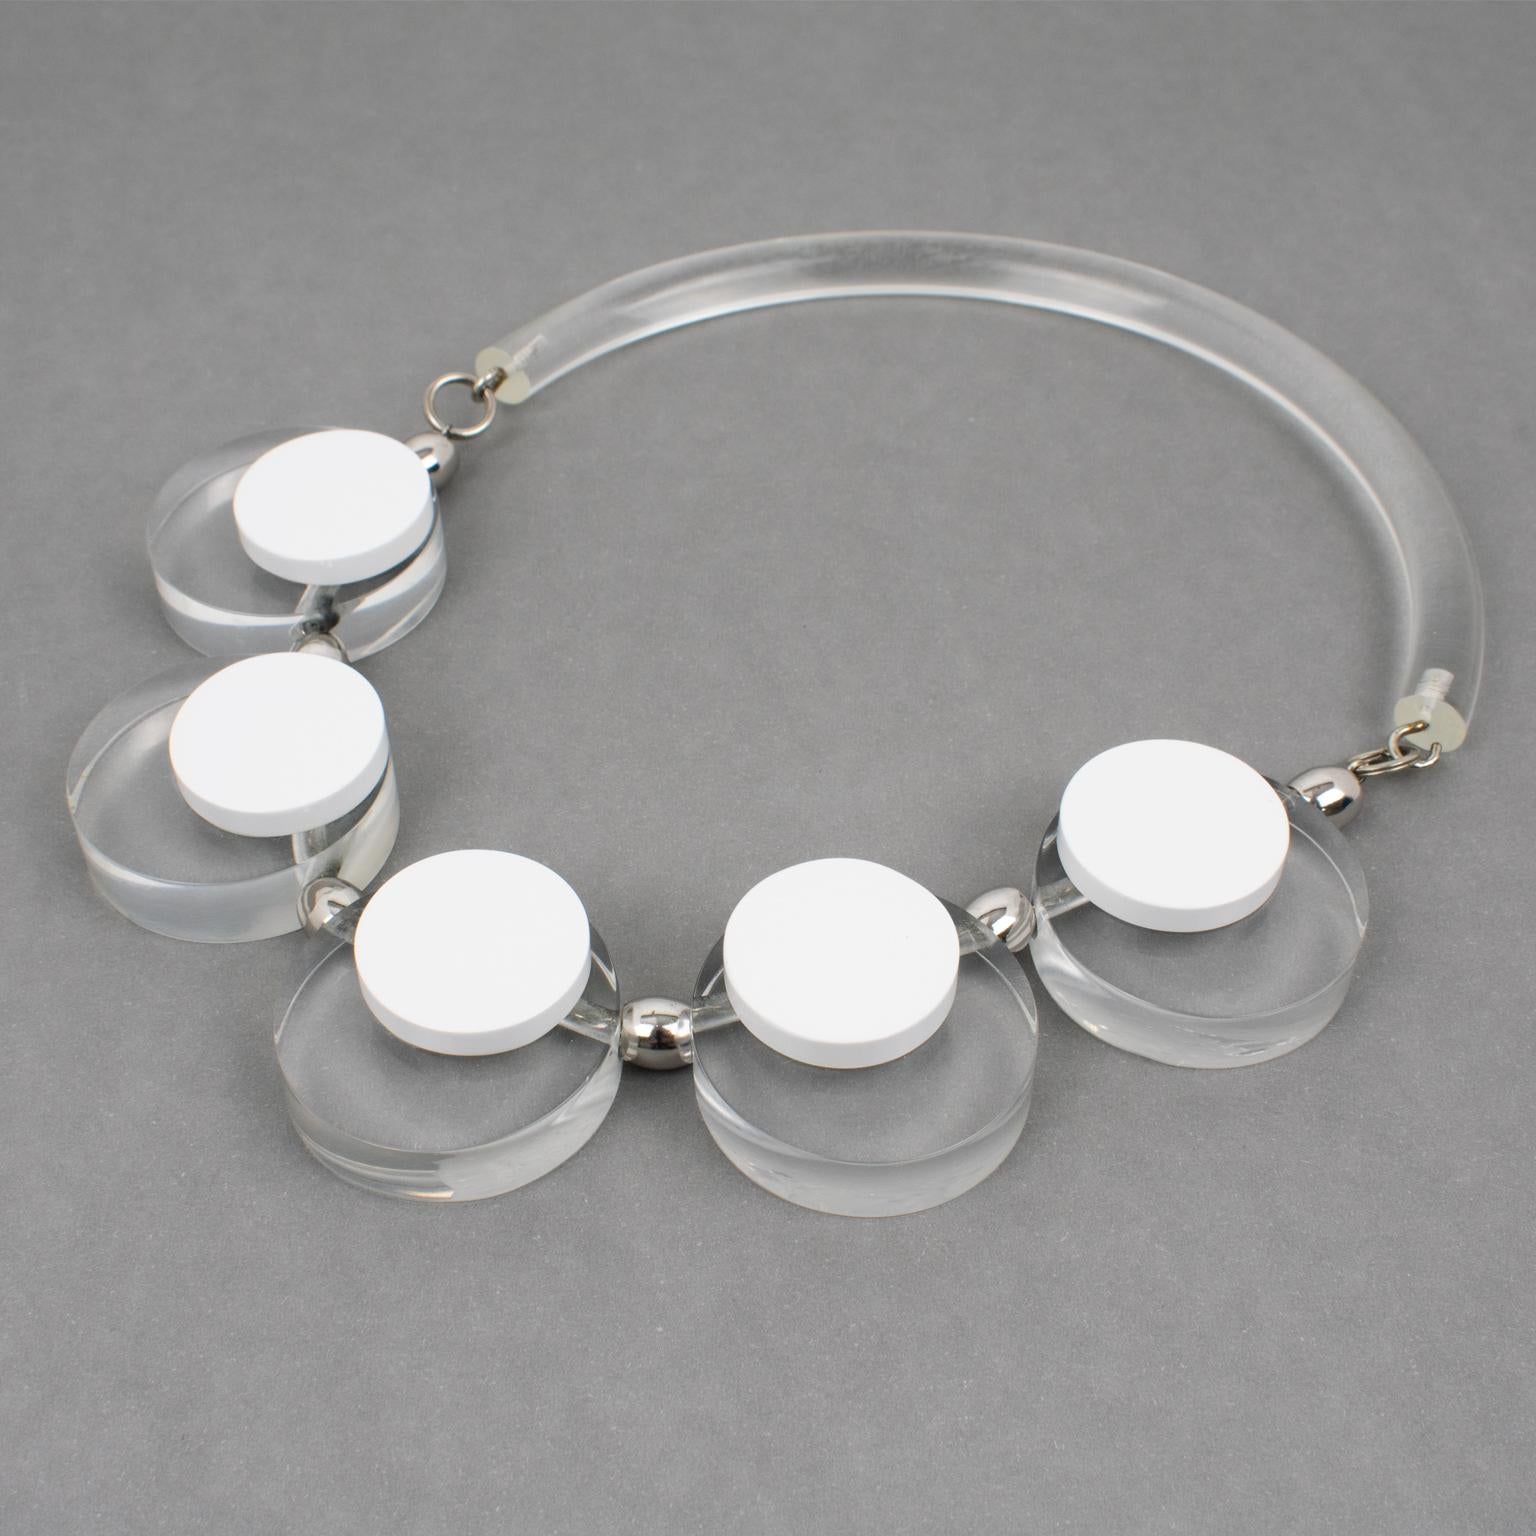 Judith Hendler Acrylic Lucite Neck Ring Necklace, 1980s For Sale 1